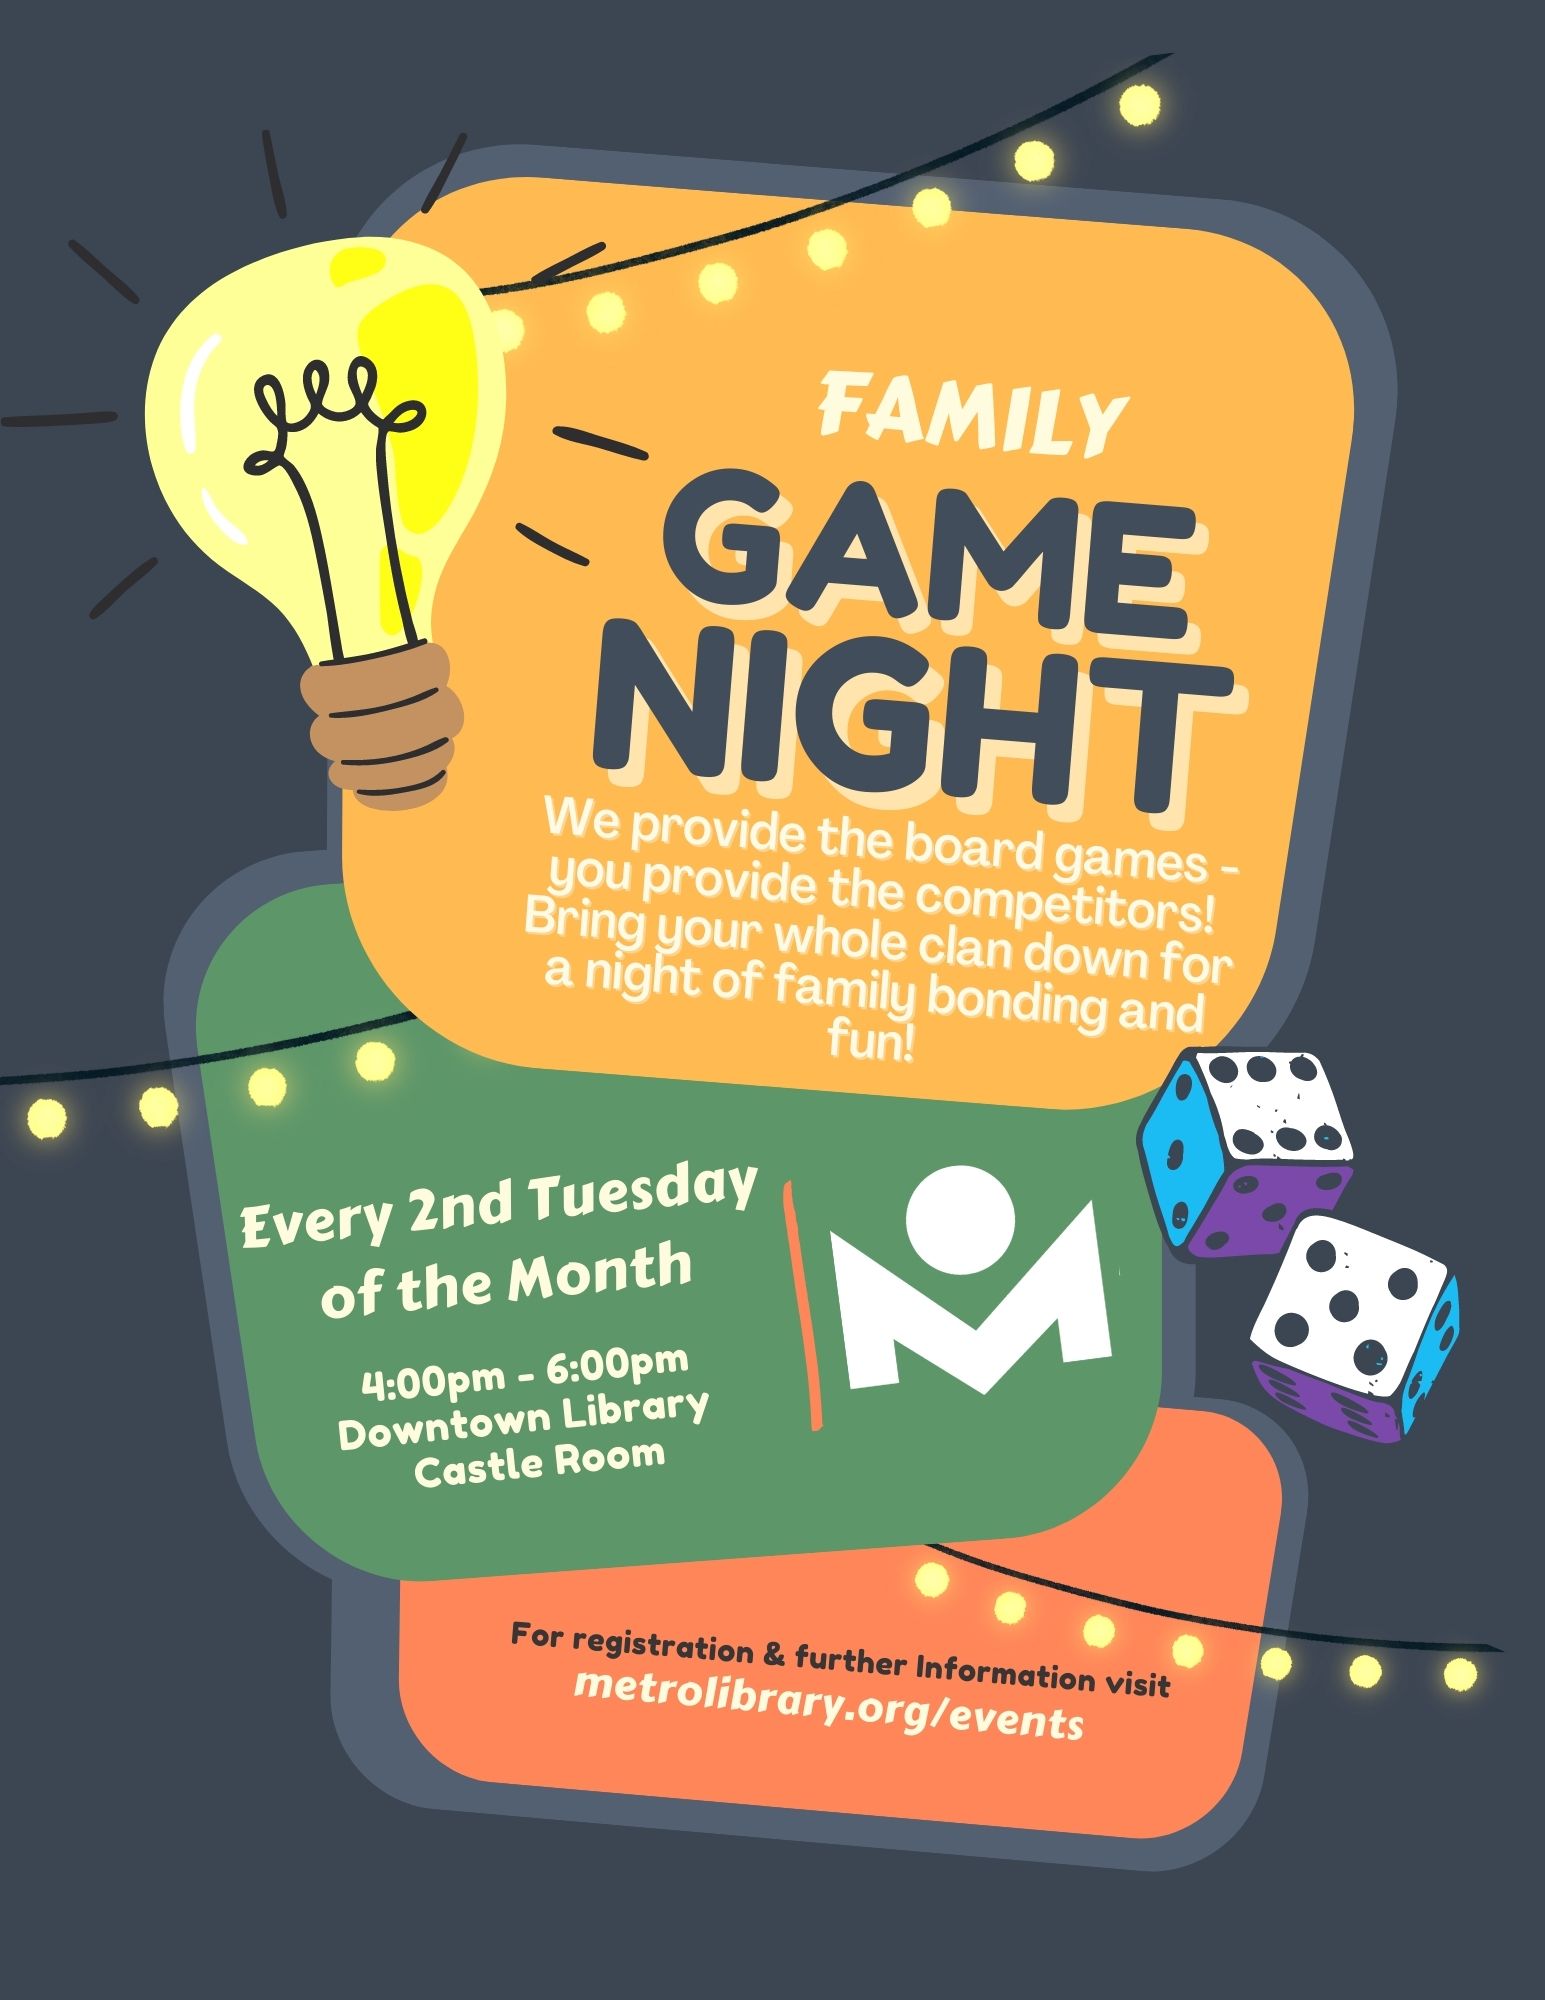 Family game night 4:00pm-6:00pm